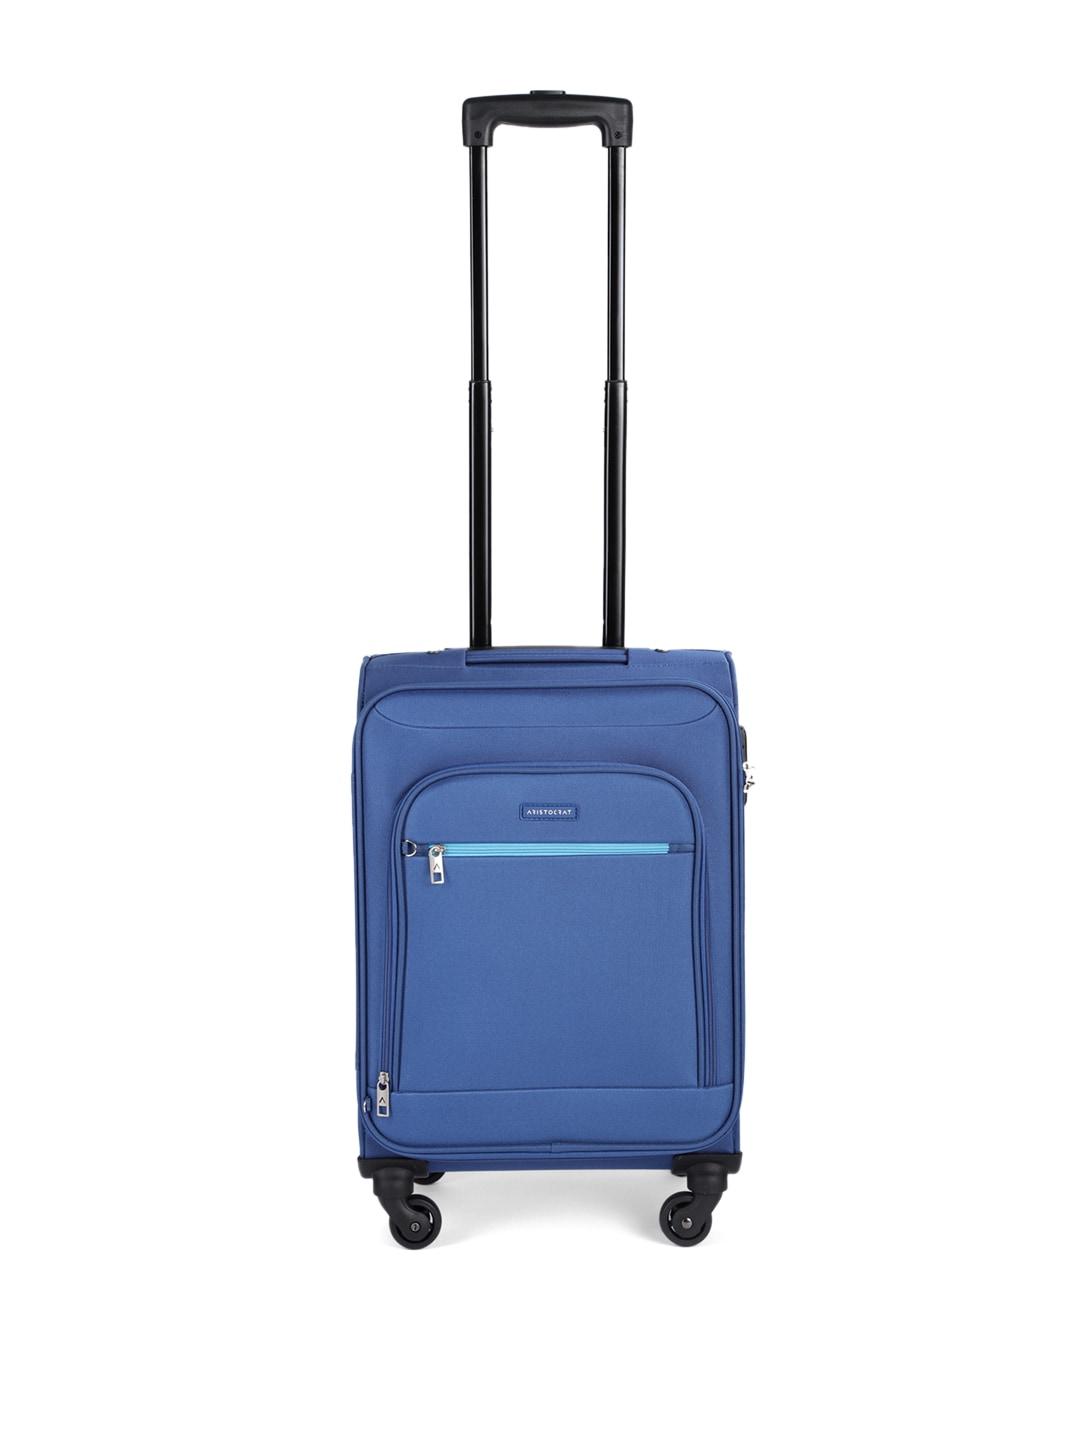 aristocrat-unisex-bright-blue-solid-nile-exp-strolly-54-cabin-trolley-suitcase